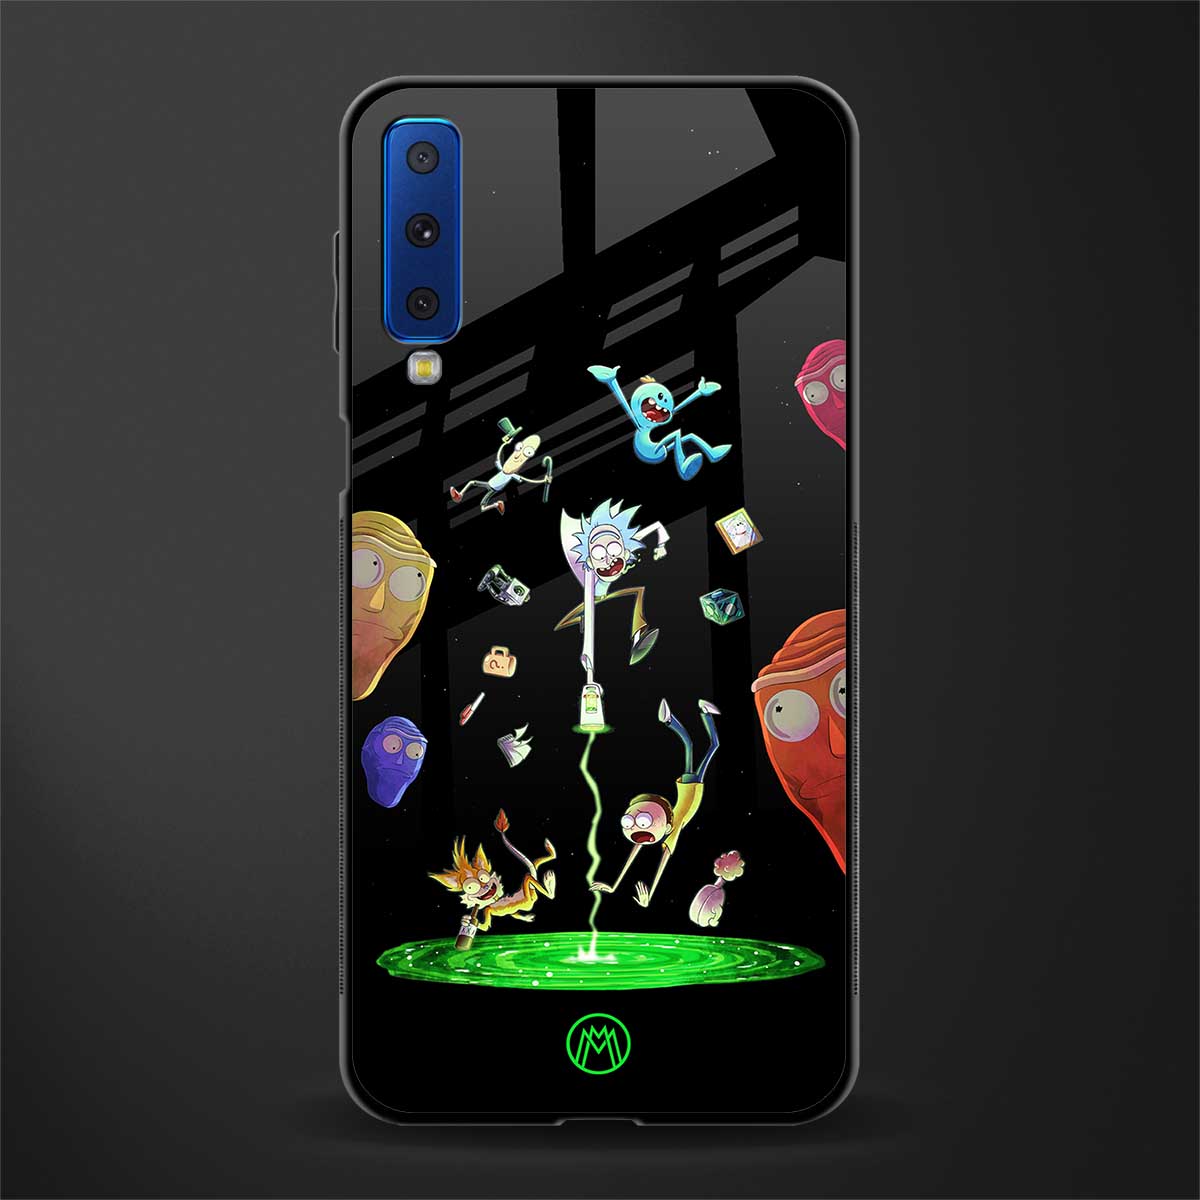 rick and morty amoled glass case for samsung galaxy a7 2018 image